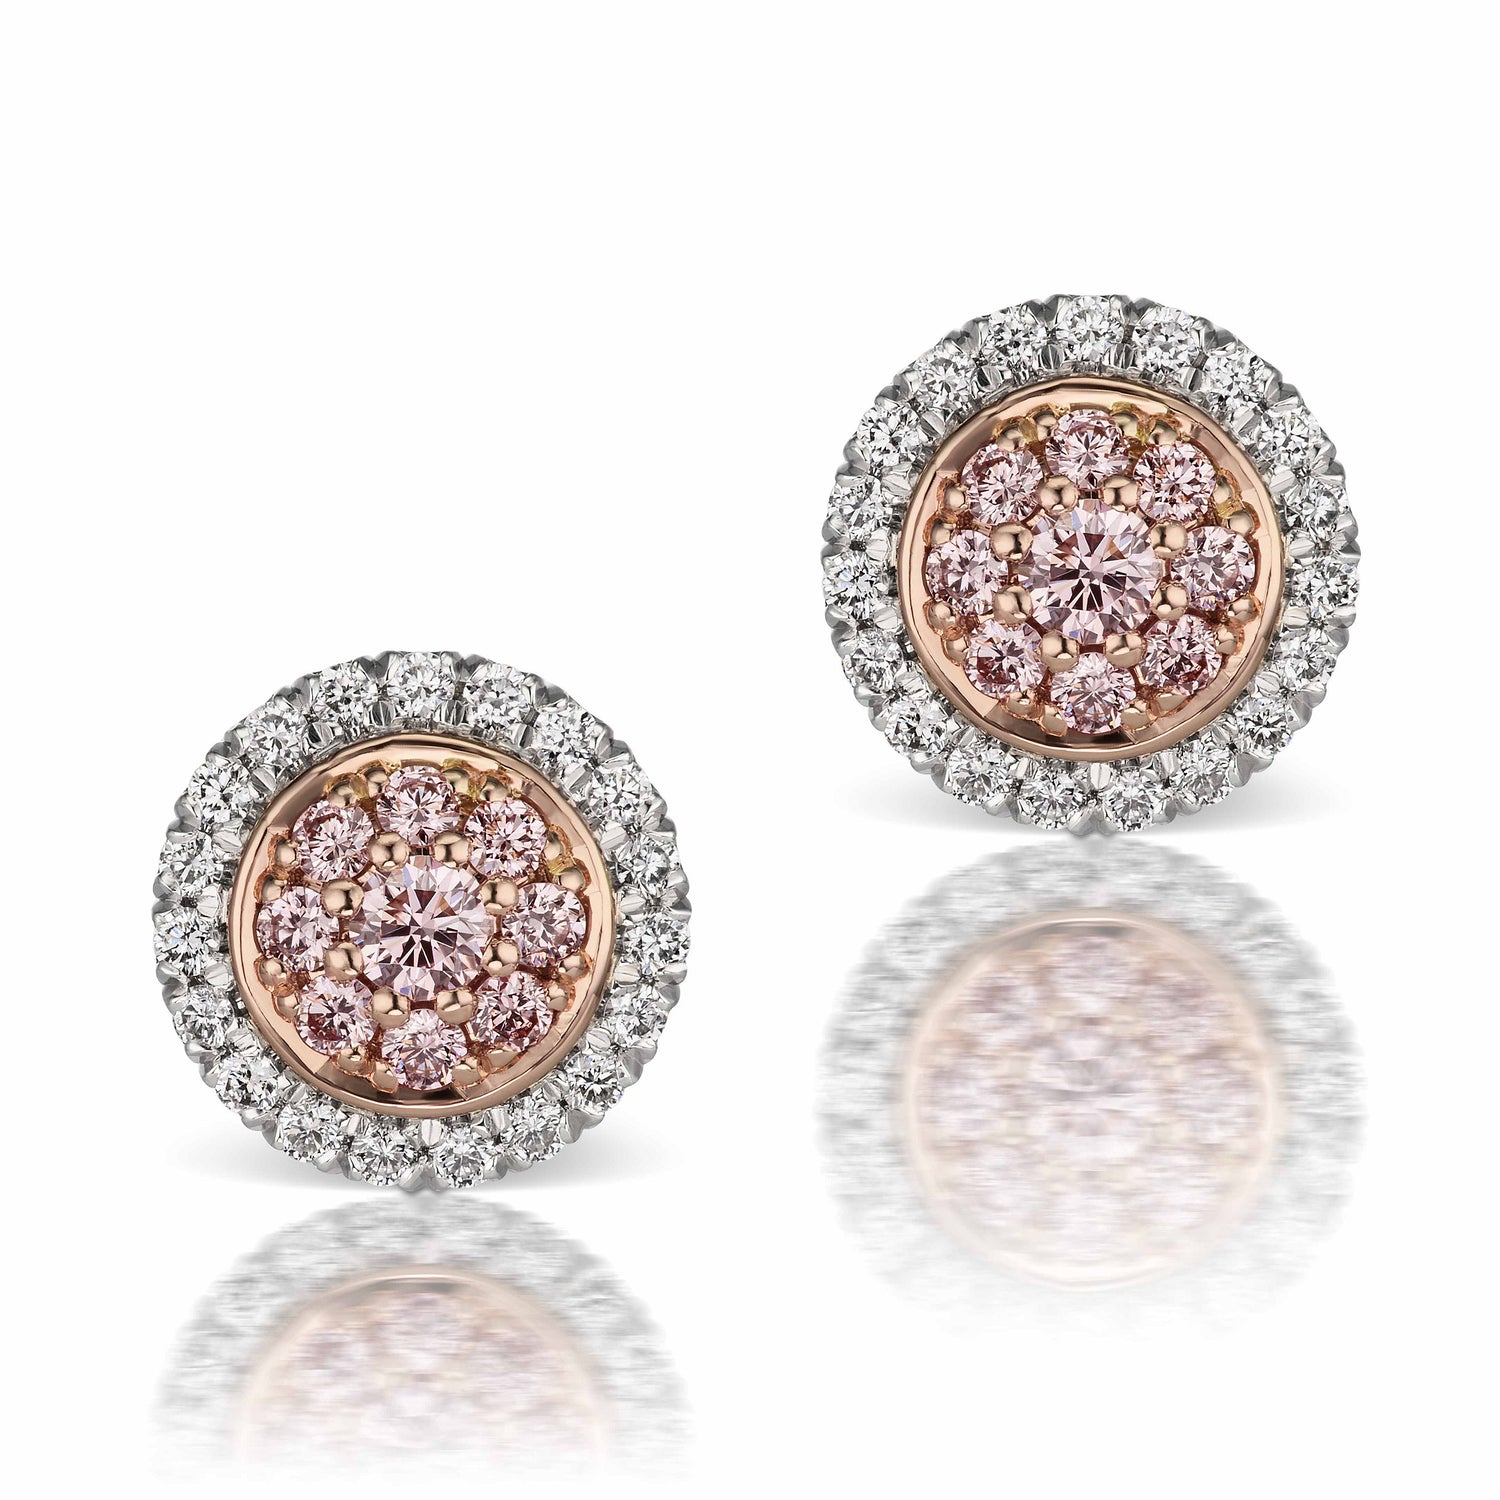 18K pink gold halo earrings featuring 0.26 ct argyle pink diamonds in the center and 0.23 white diamonds in the outer circler